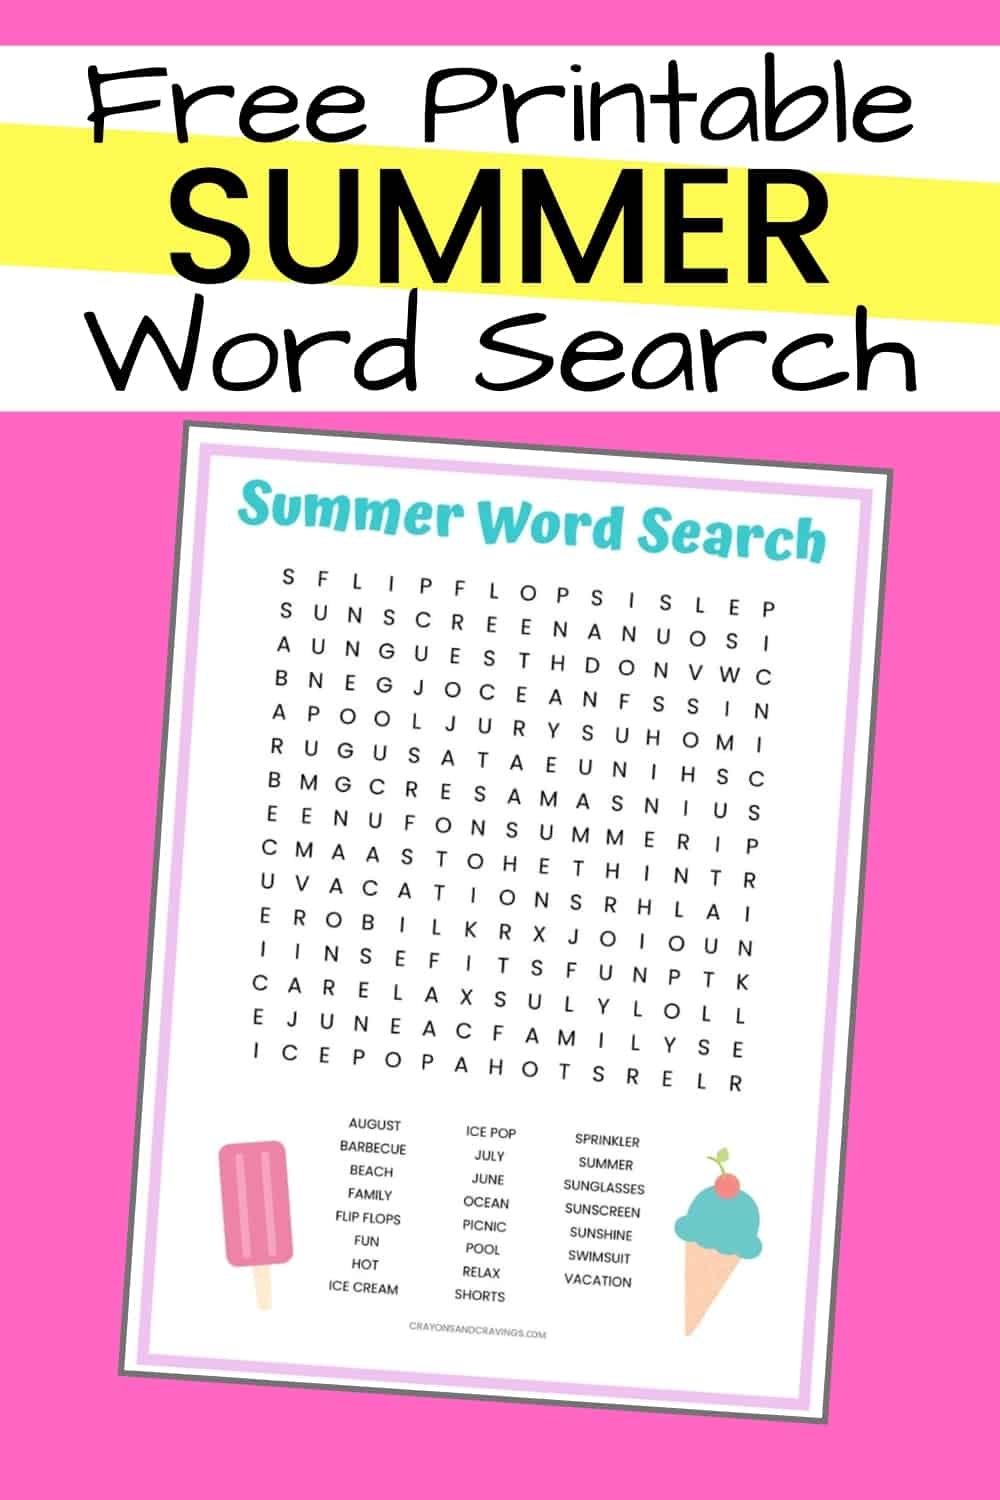 free-printable-summer-word-search-puzzles-crossword-puzzles-printable